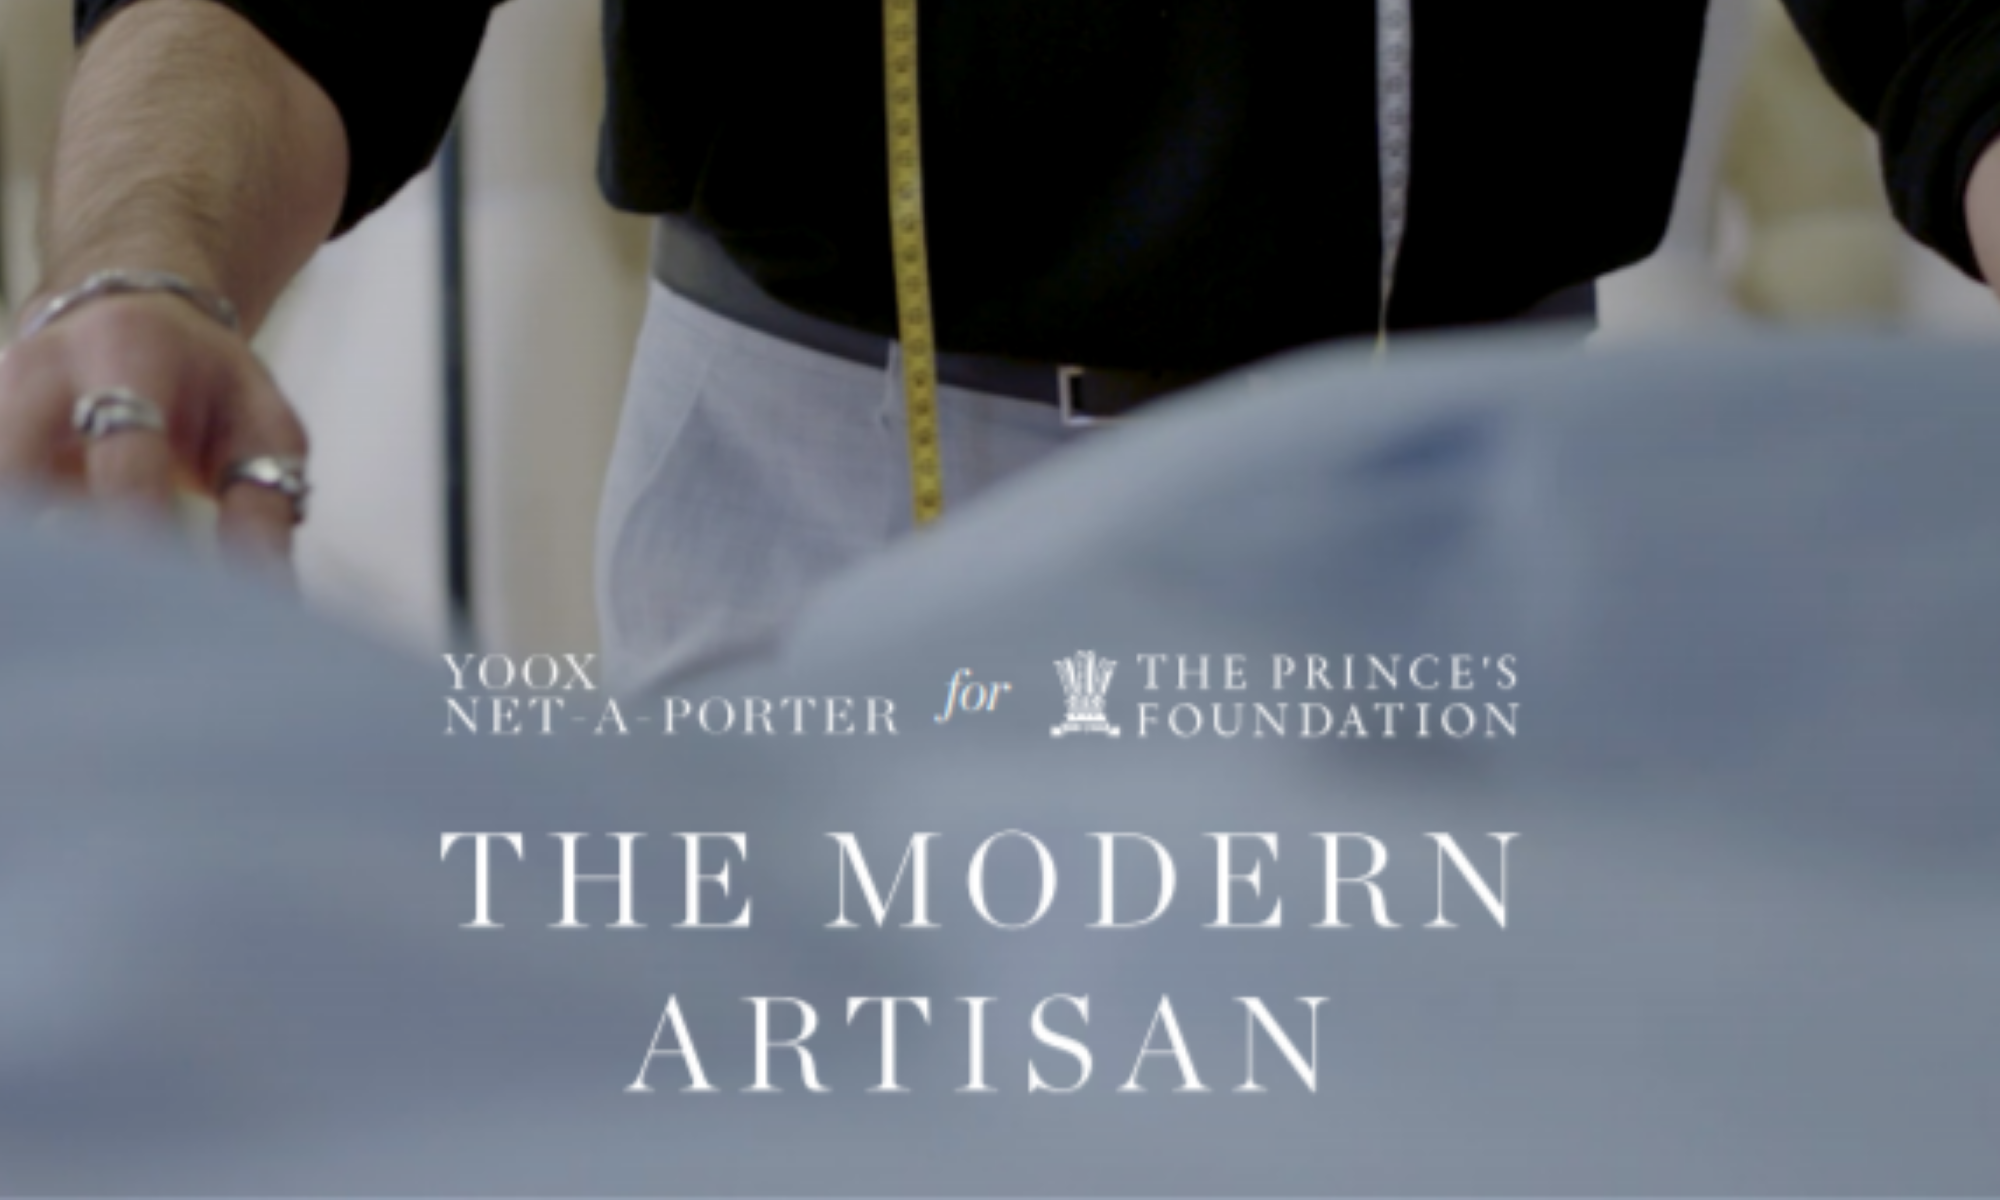 YOOX NET-A-PORTER For THE PRINCE'S FOUNDATION